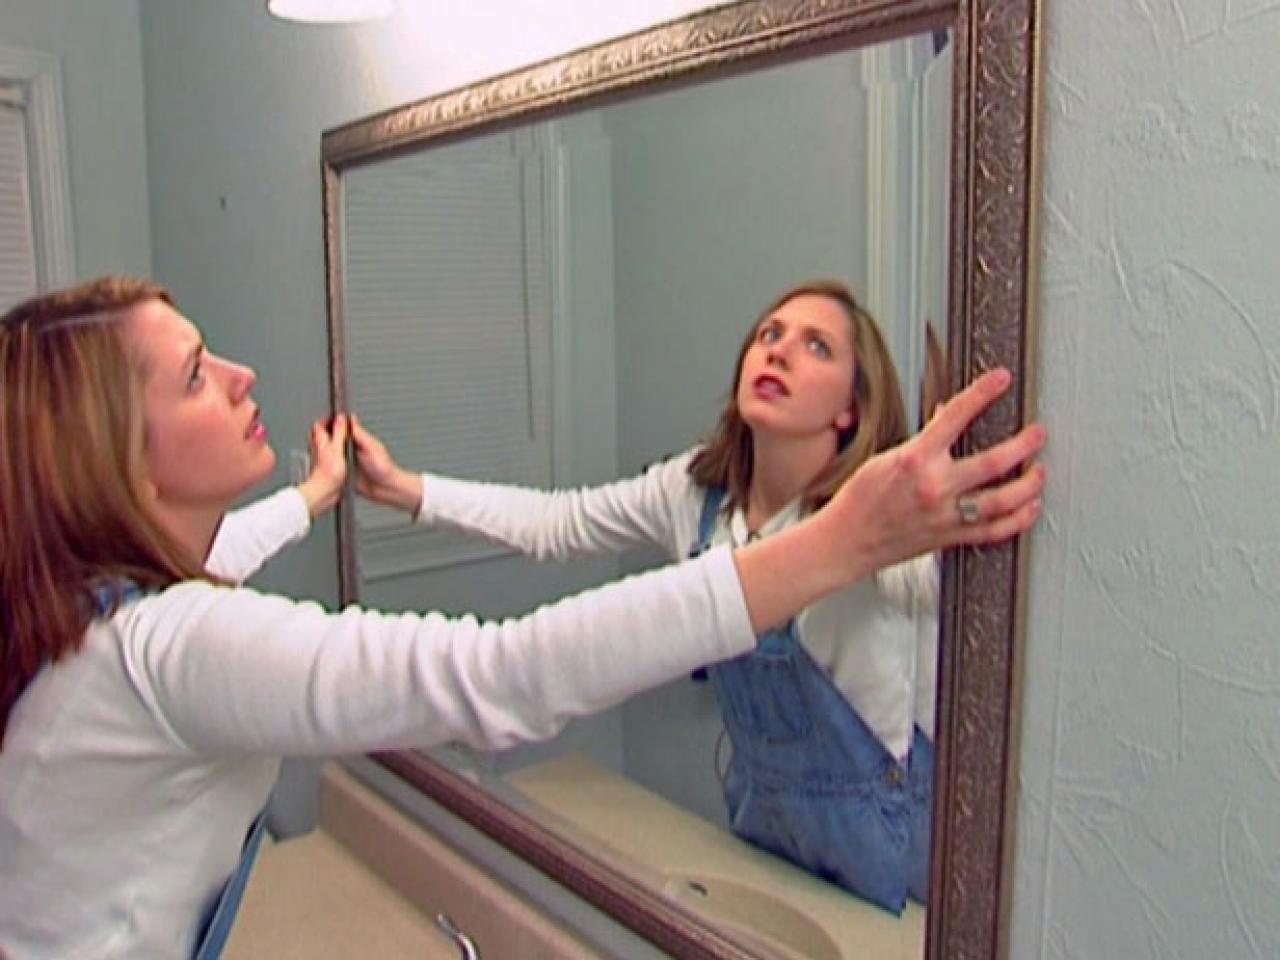 How To Install A Bathroom Mirror, How To Install A Vanity Mirror